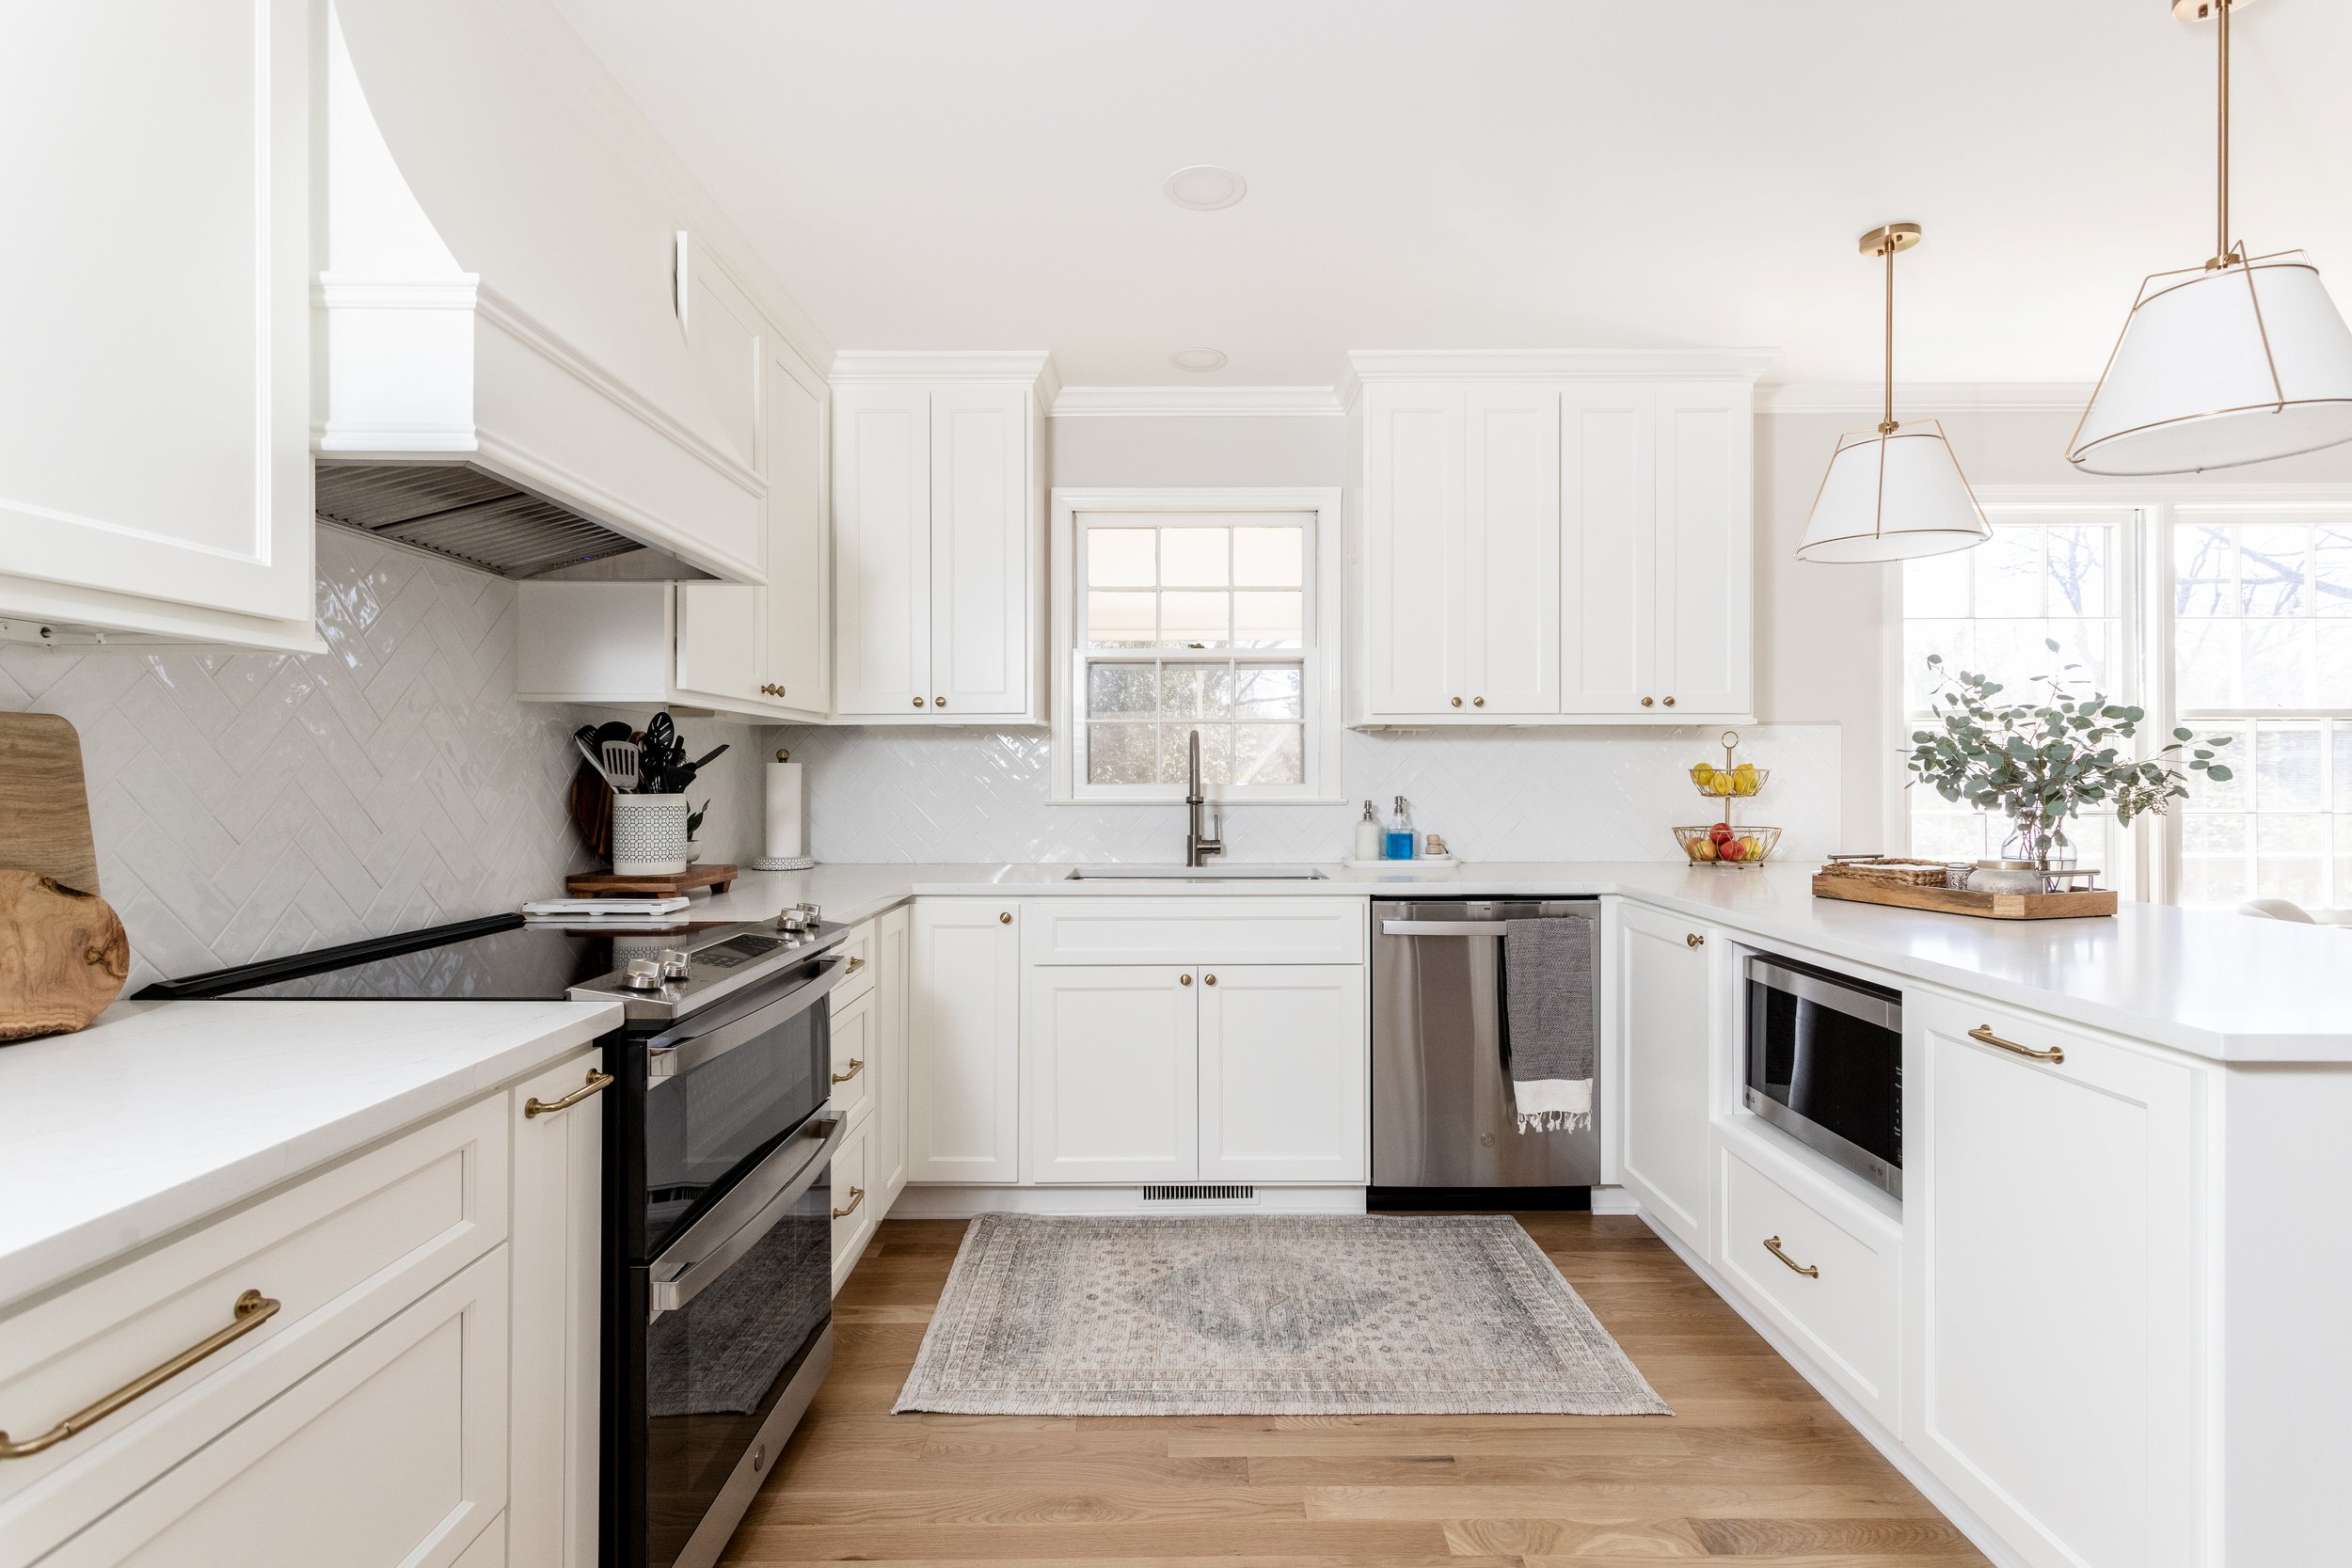 Sugar Creek Kitchen Remodel: From Outdated to Timeless Elegance | Greer ...